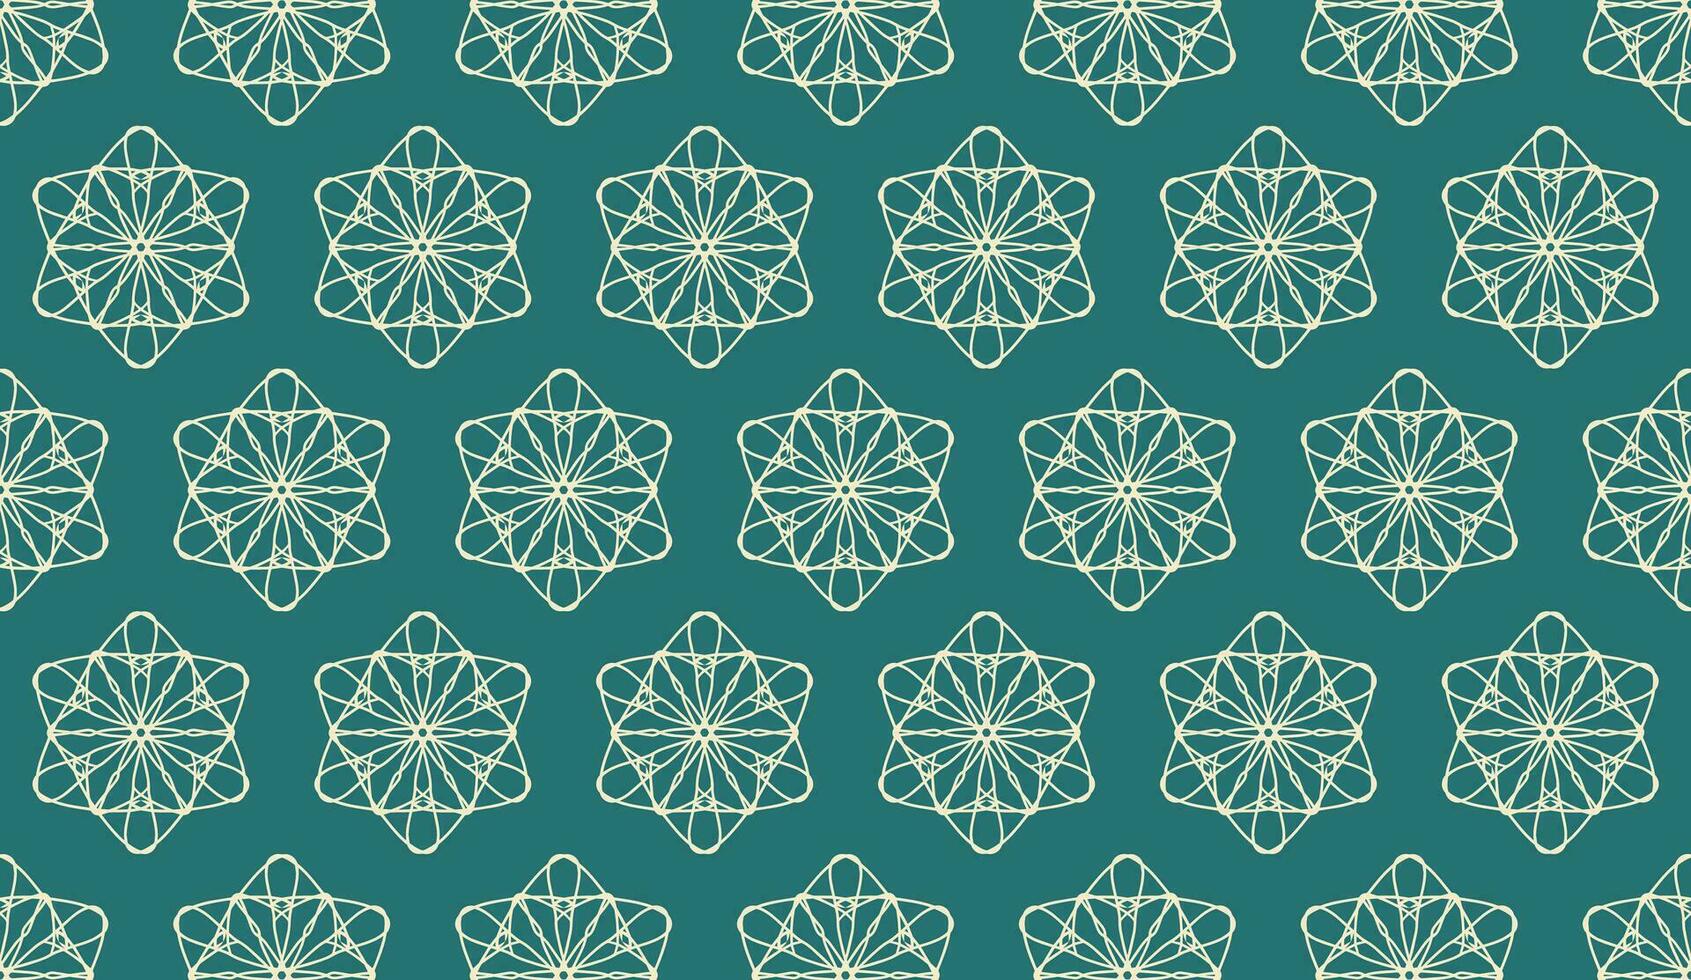 abstract luxury elegant light green and turquoise green floral seamless pattern vector